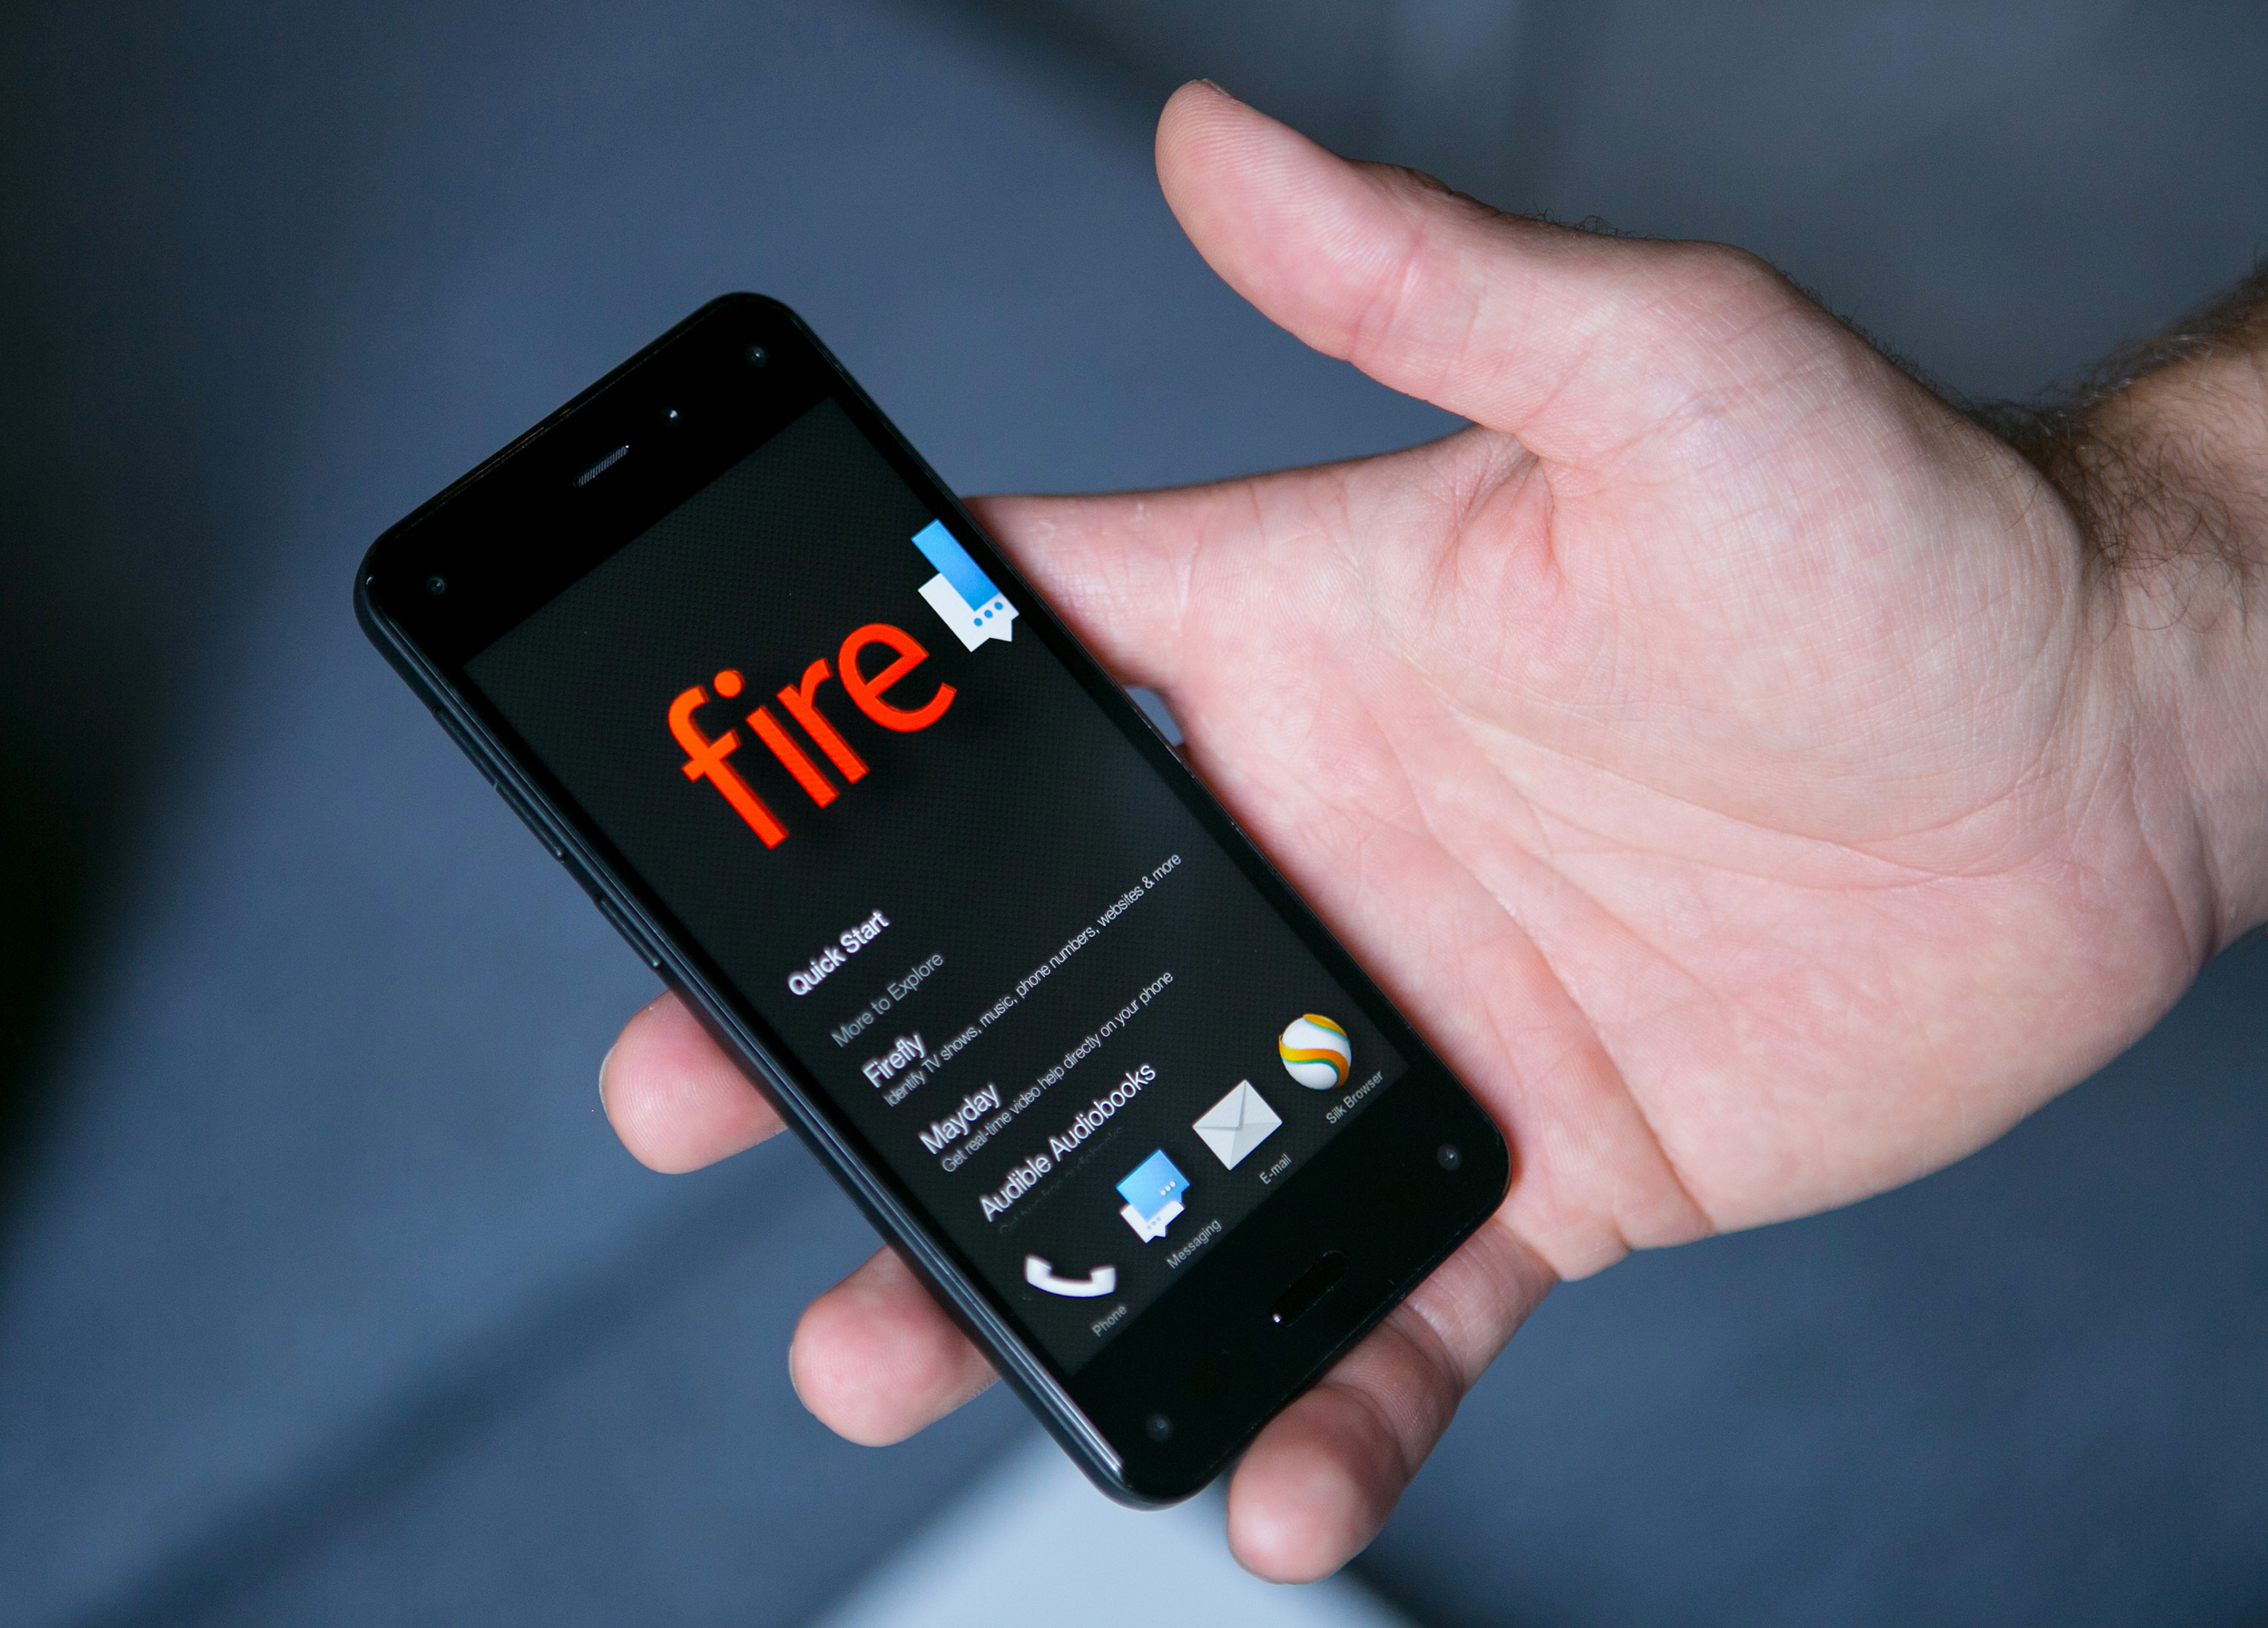 A man holds the new Fire smartphone by Amazon.com Inc. during demonstration at a a news conference in Berlin, Germany, on Monday, Sept. 8, 2014. (Bloomberg&mdash;Bloomberg via Getty Images)